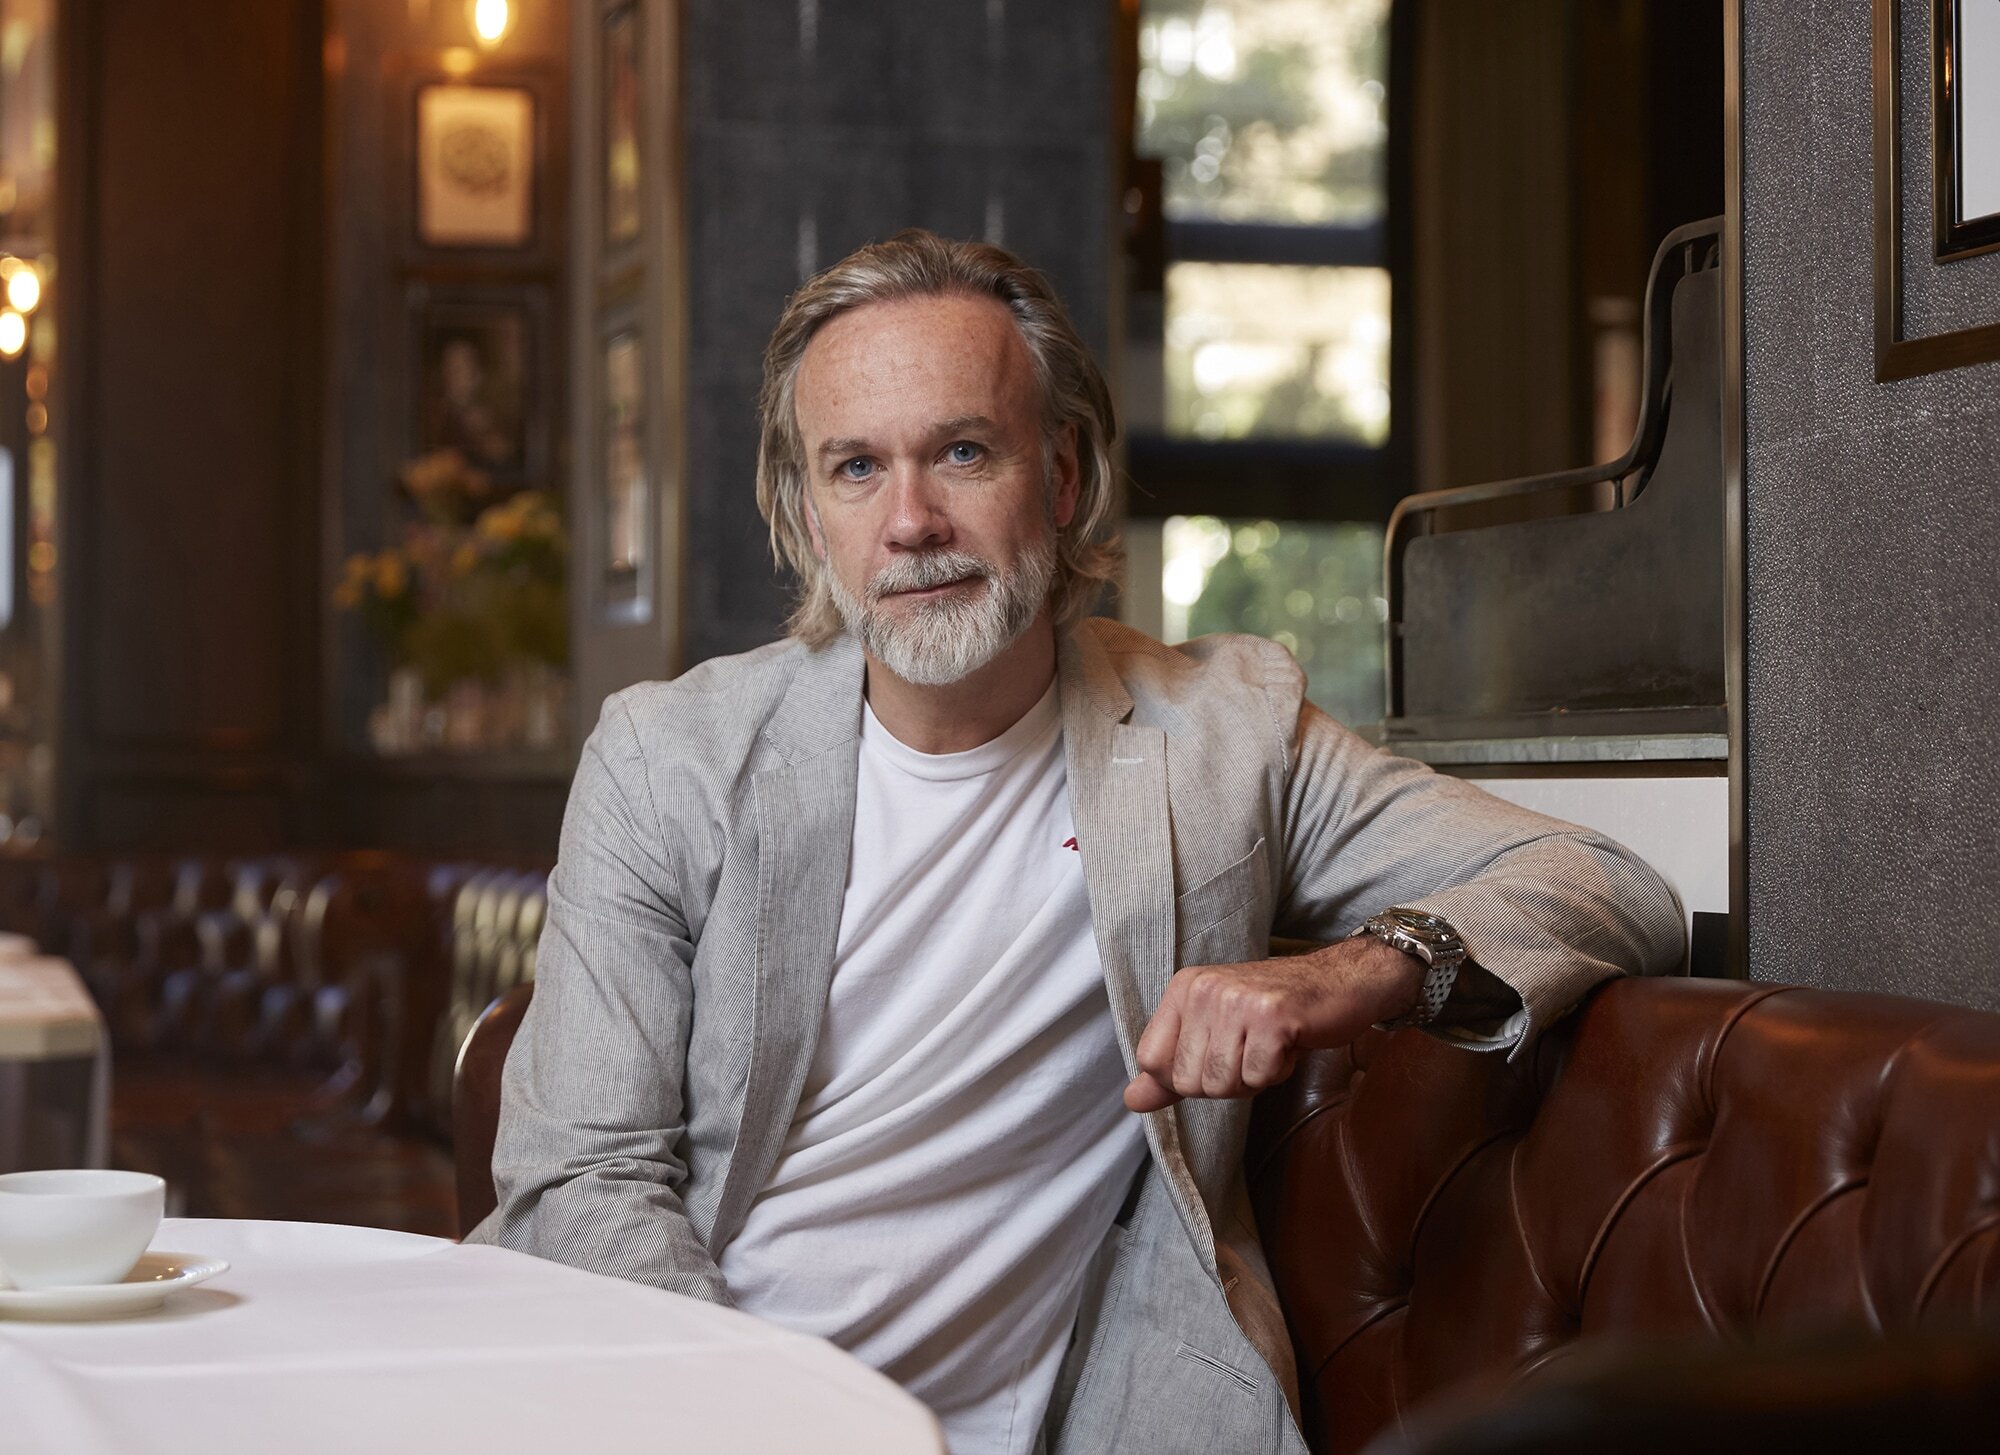 'I'm ready for a new chapter': Marcus Wareing to close Marcus at the Berkeley hotel 